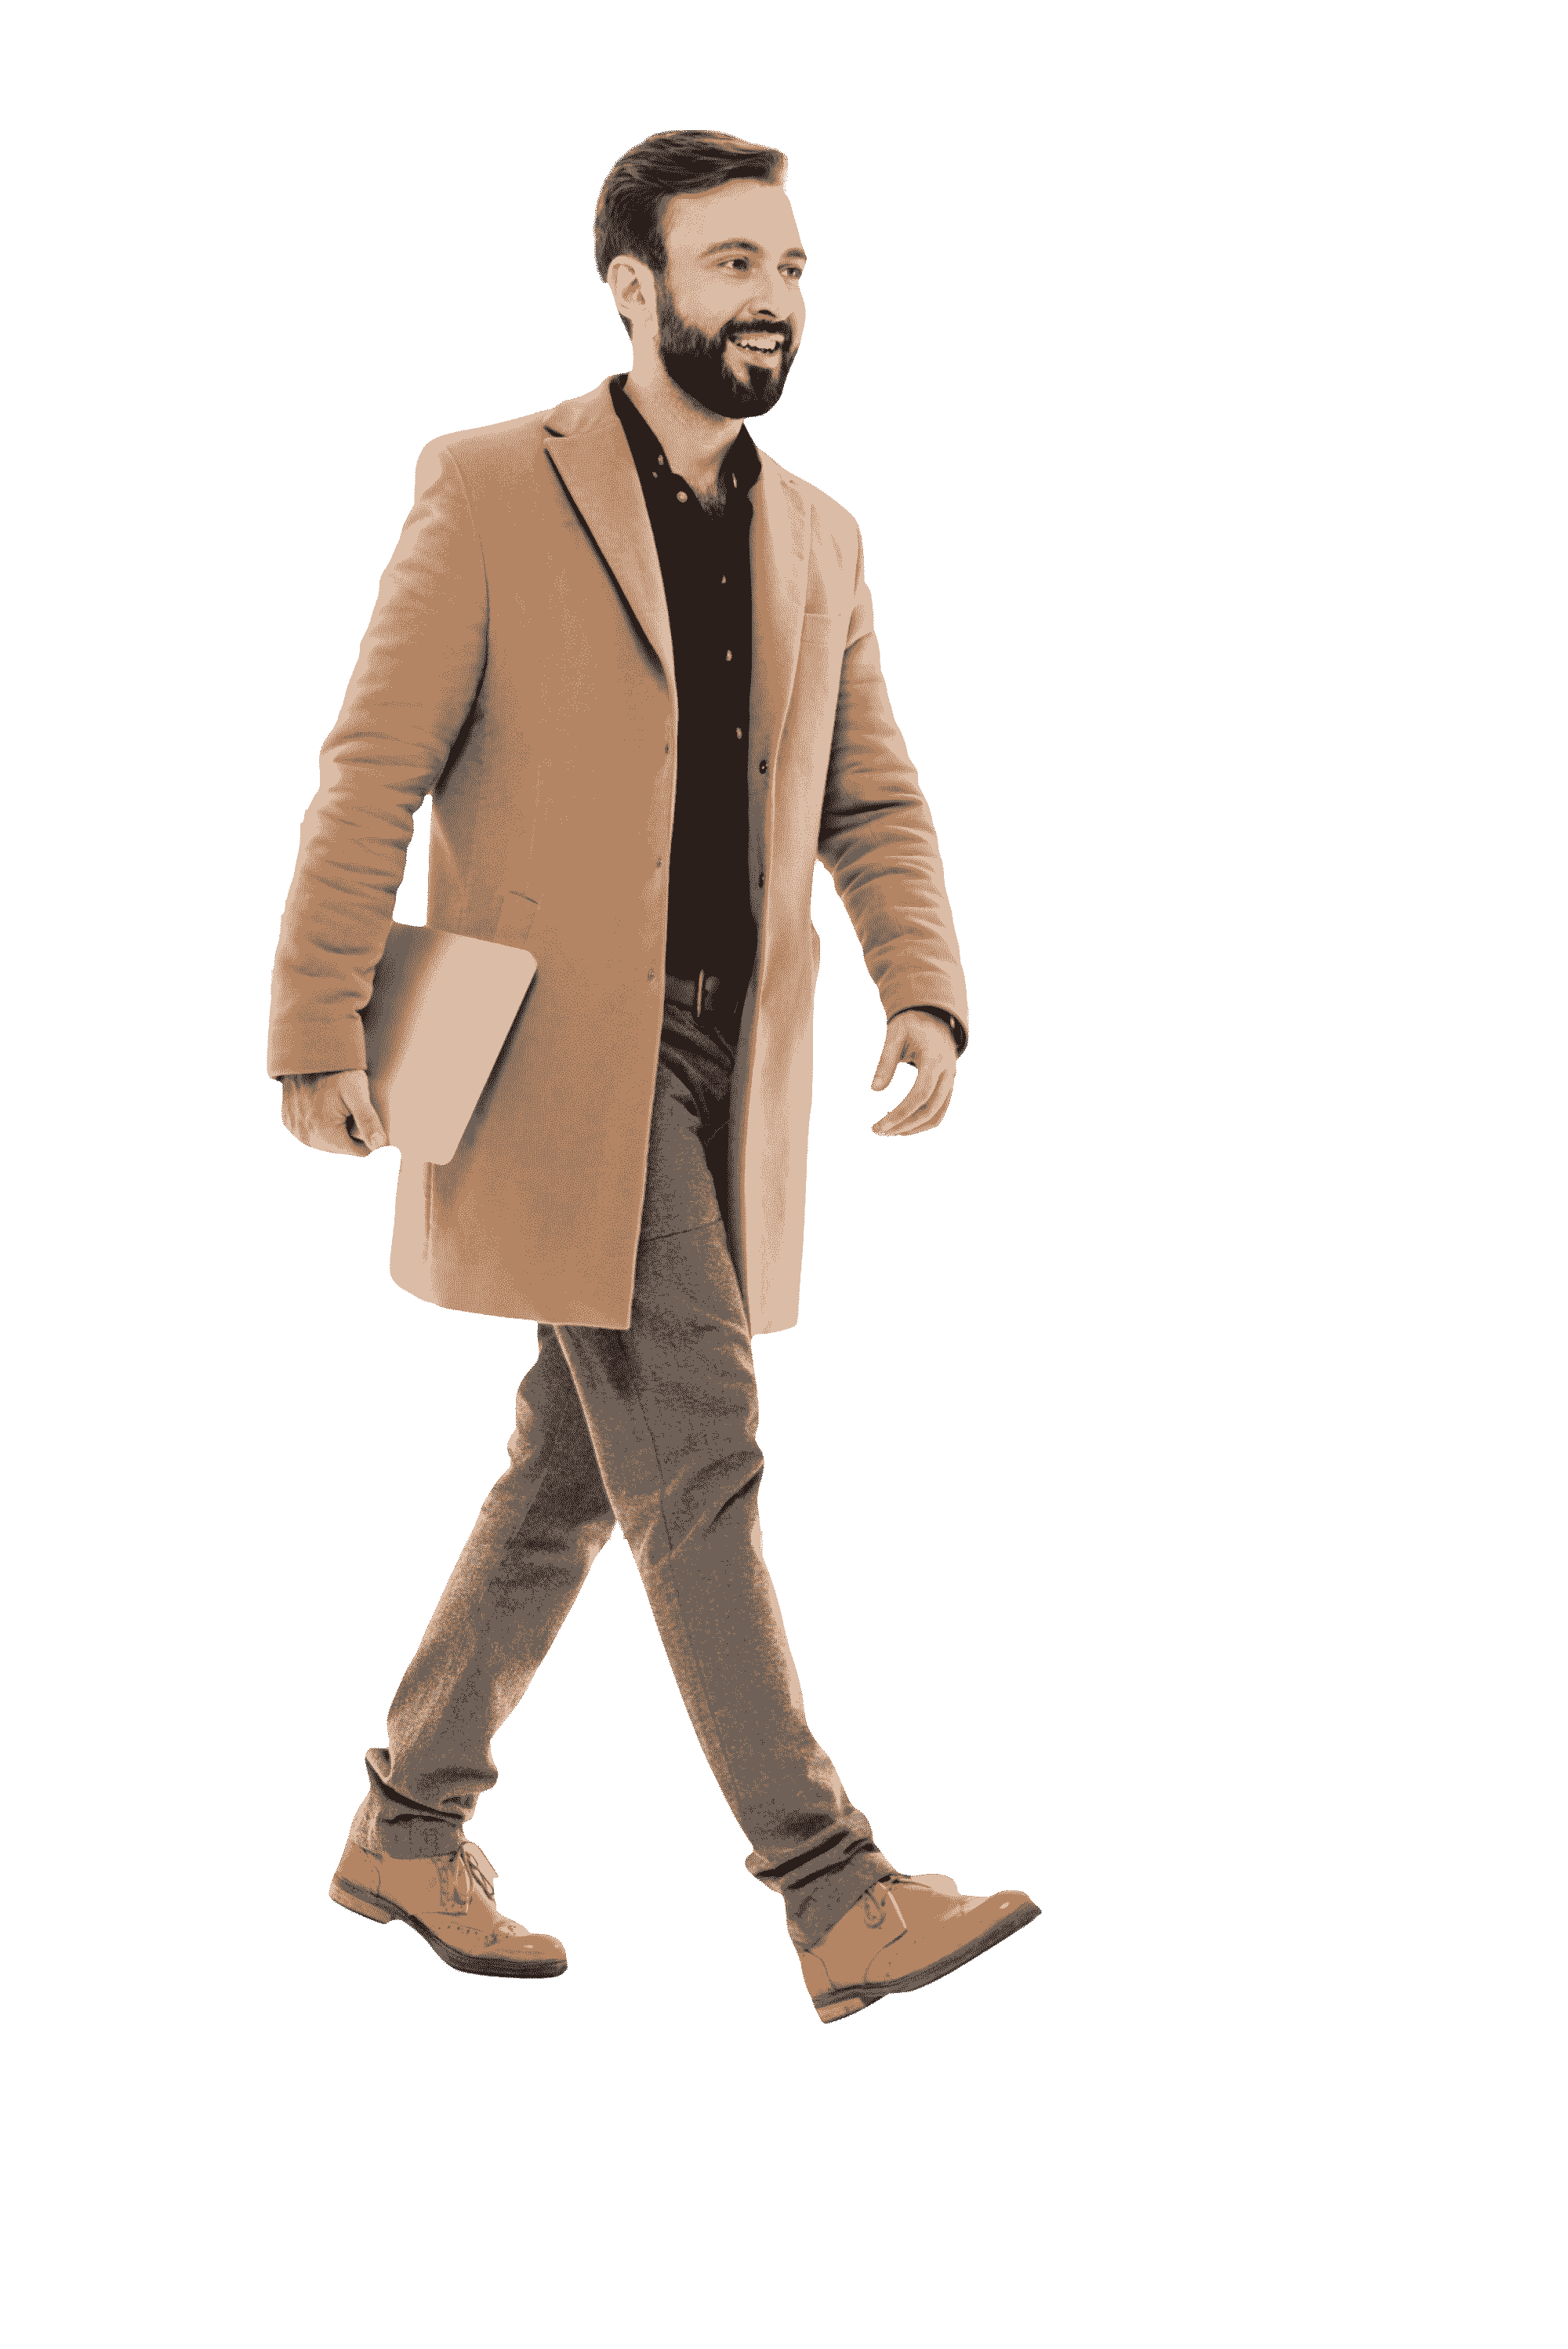 Man Walking With Book Transparent Image Free PNG Download,,Full length portrait of a confident bearded guy